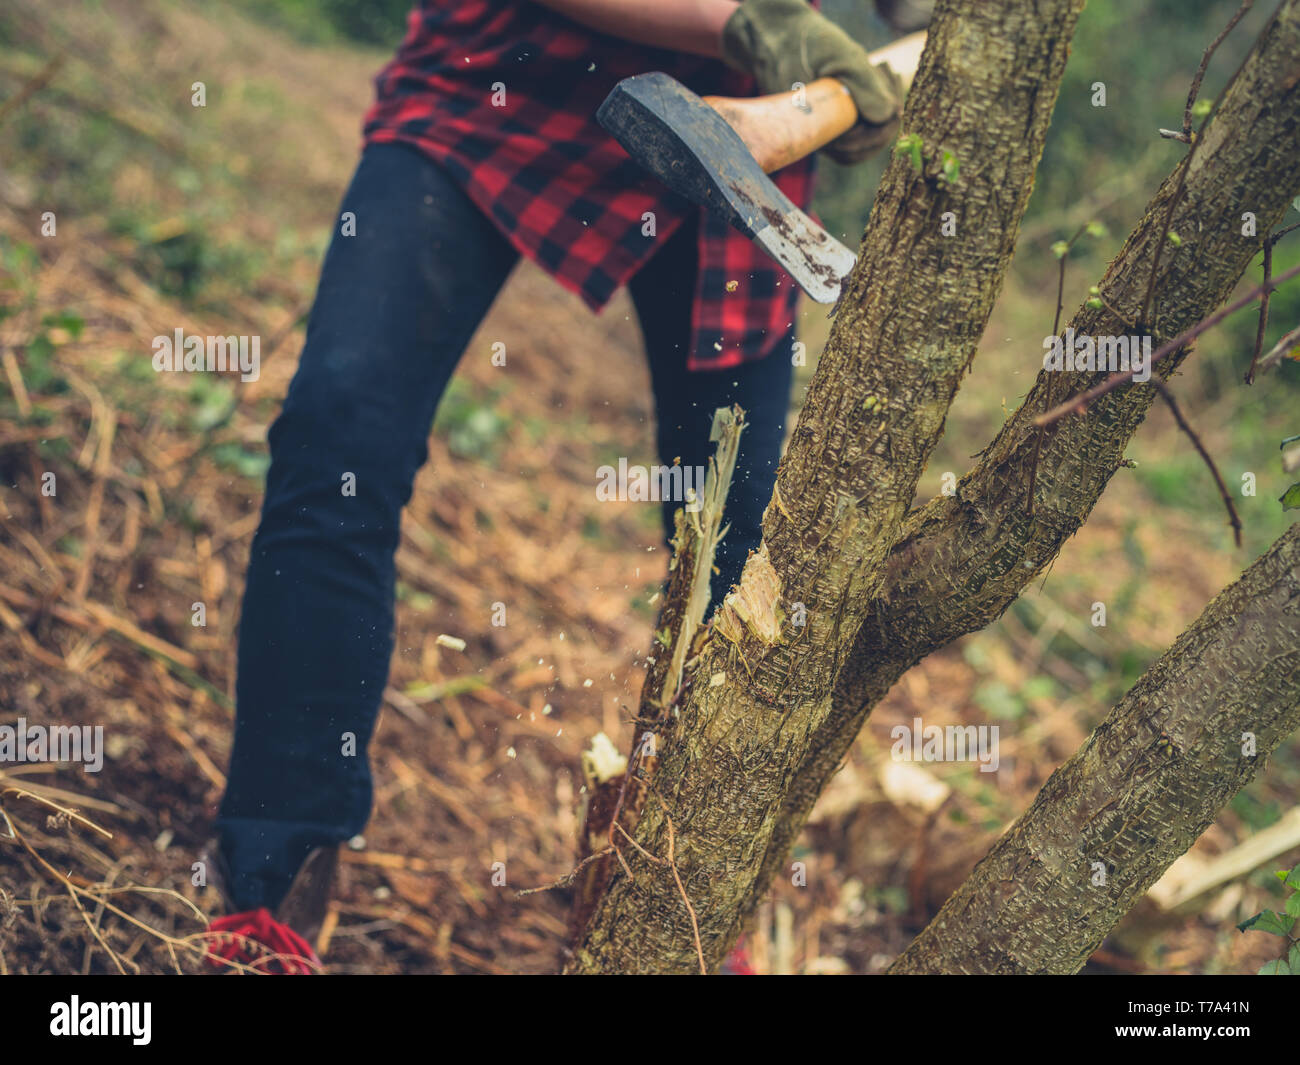 A young woman is cutting down a tree with an axe Stock Photo